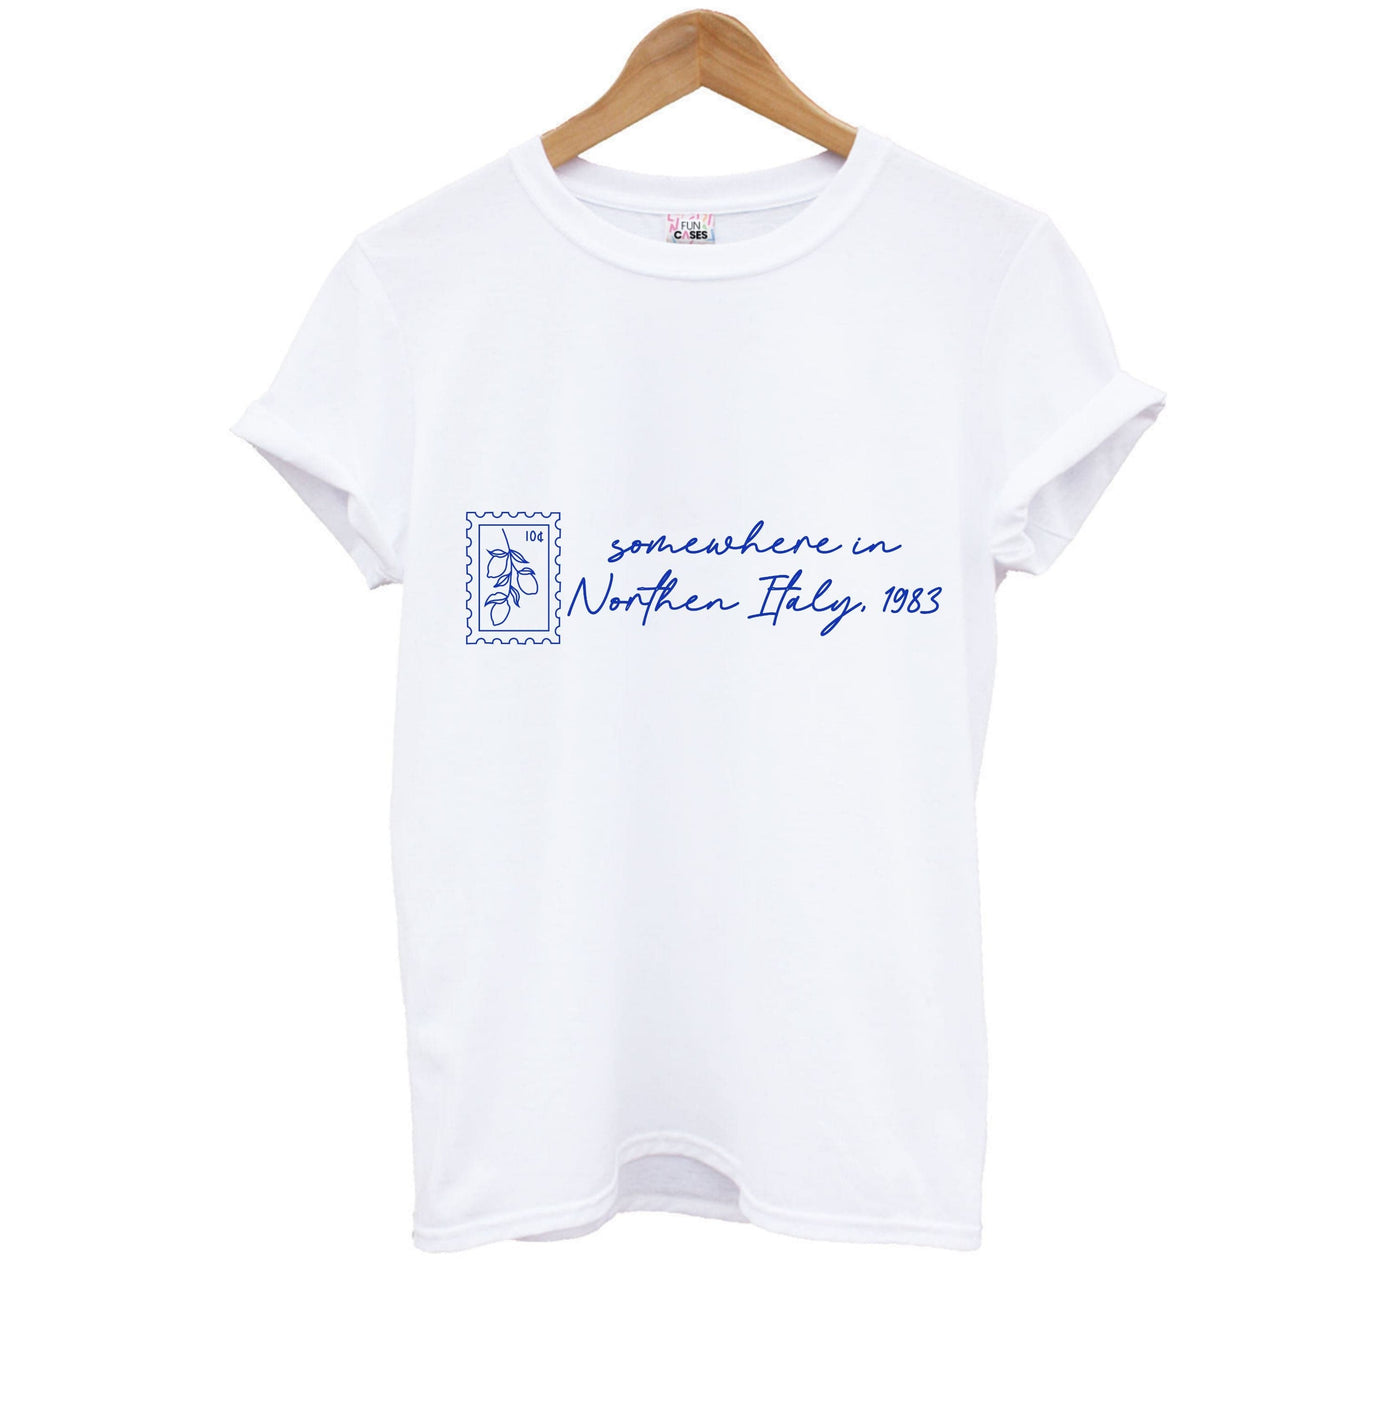 Somewhere In Northen Italy - Call Me By Your Name Kids T-Shirt